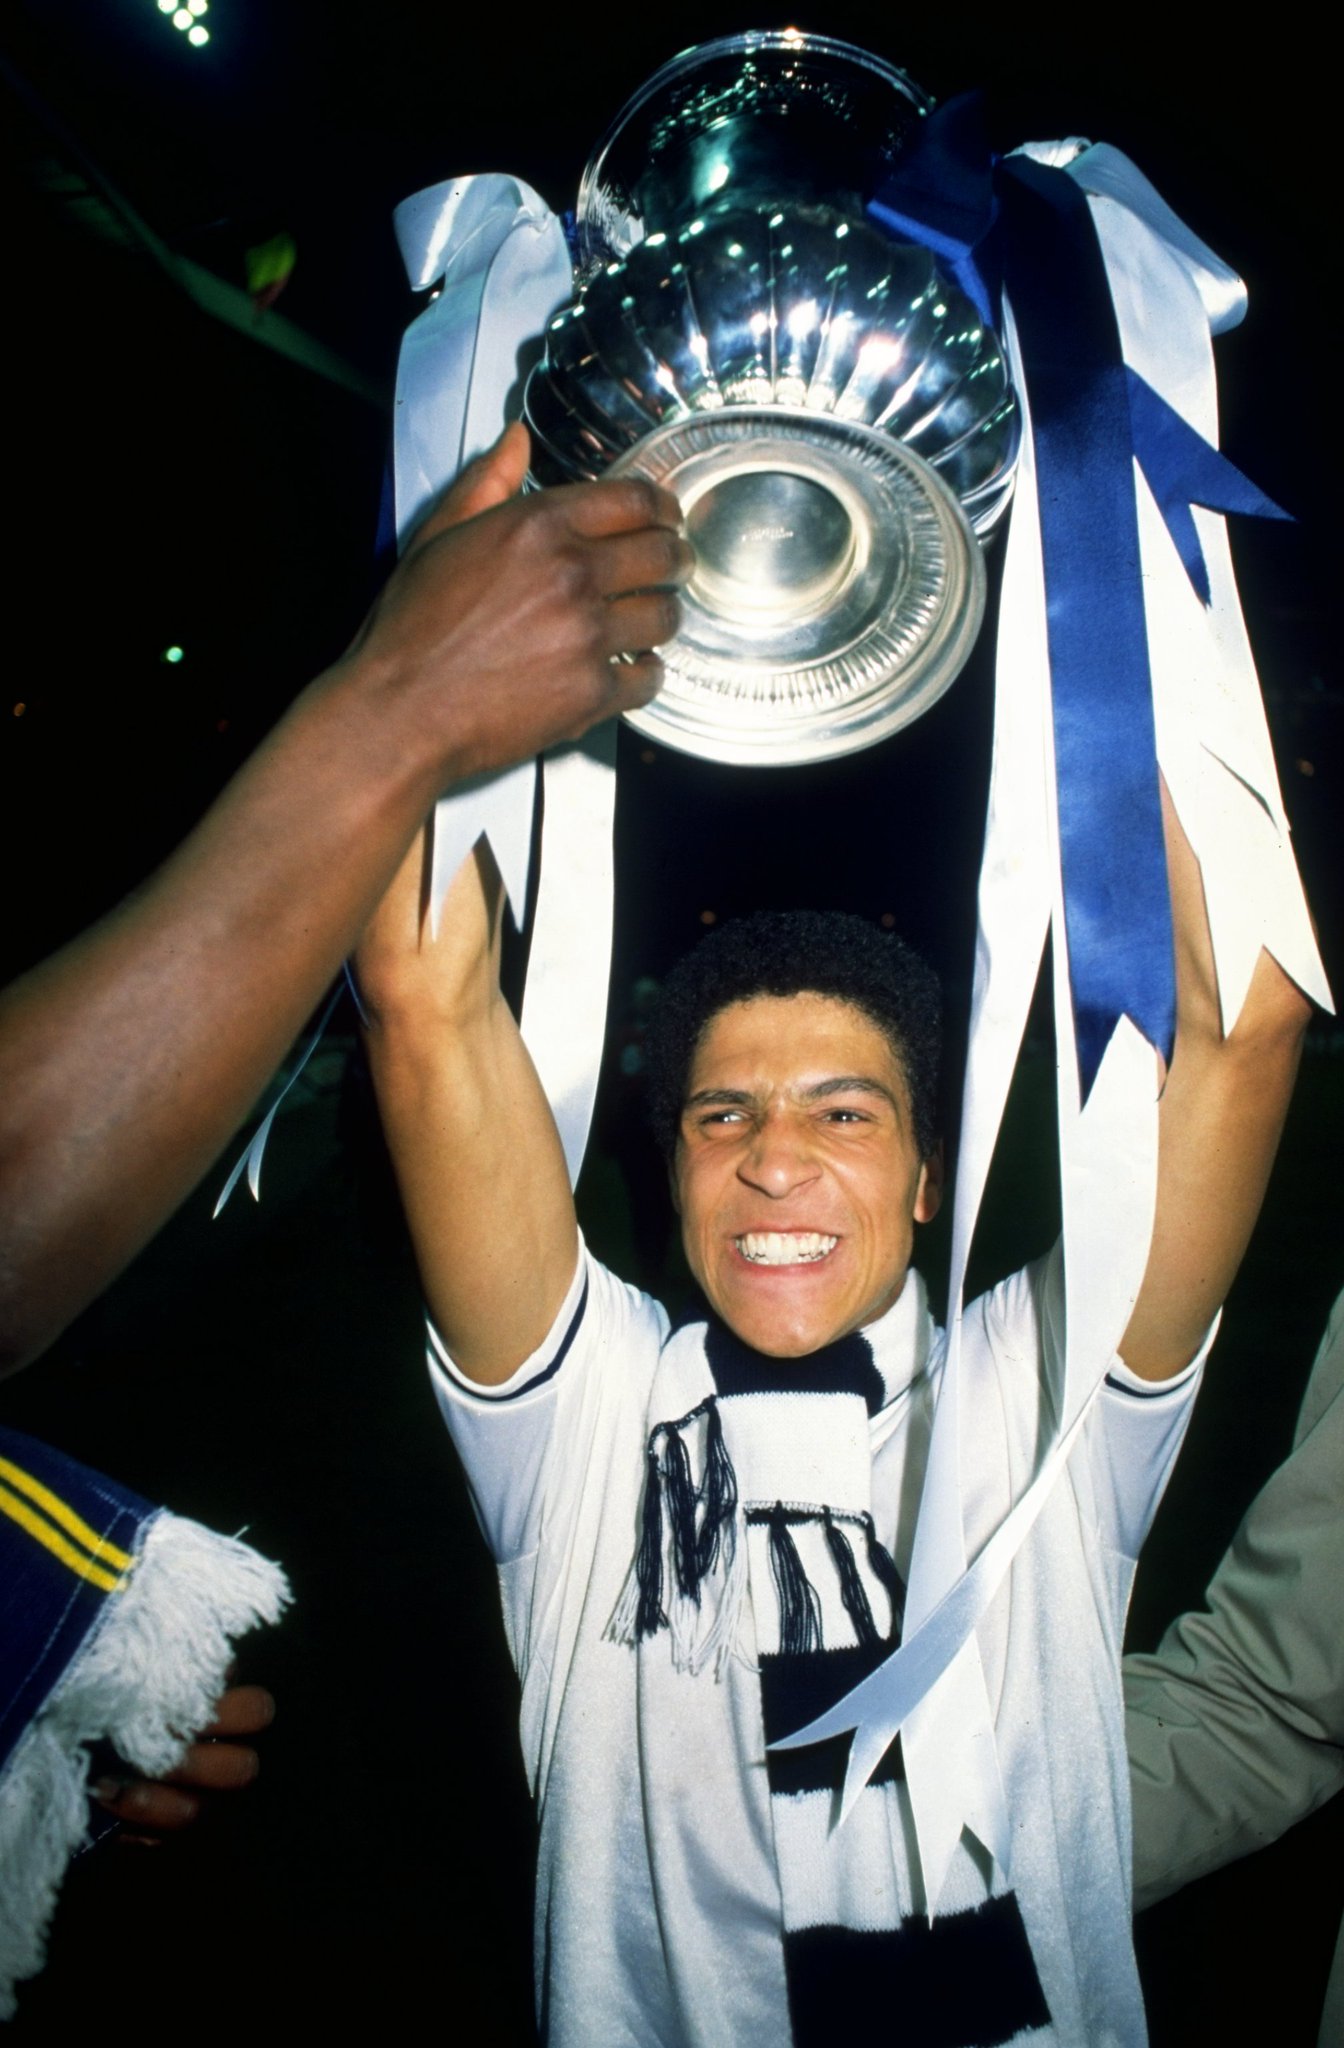 Happy Birthday, Chris Hughton!   FA Cup UEFA Cup  53 caps; two major tournaments

And not a bad manager. 